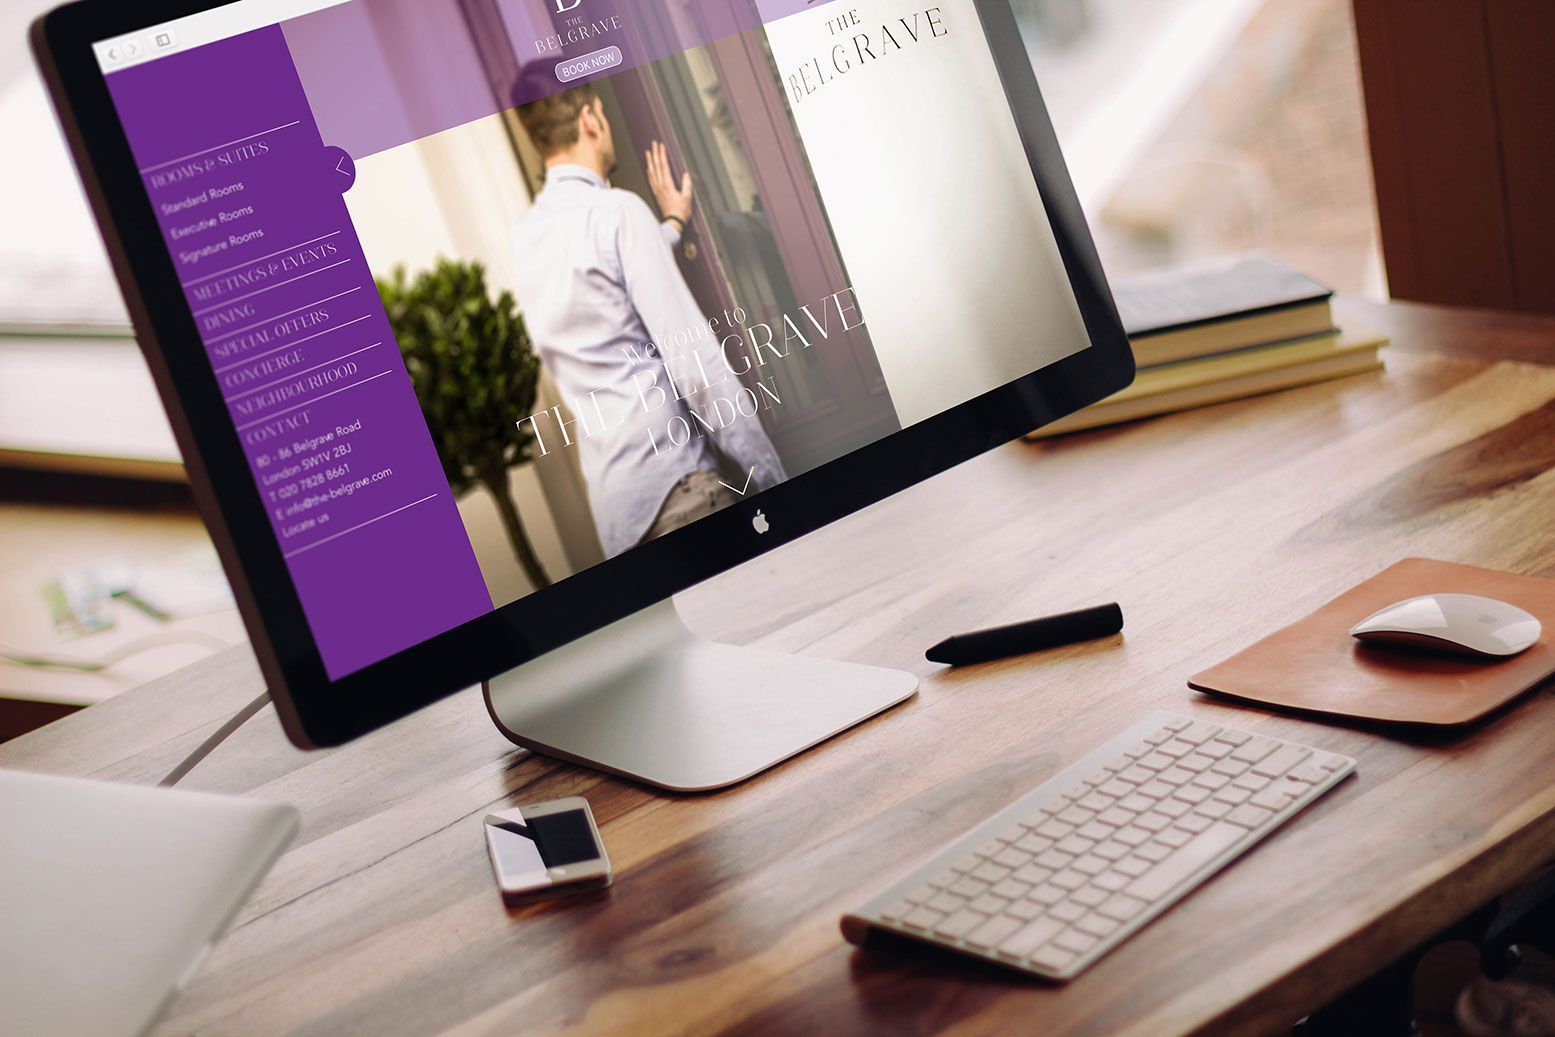 A mac on a desk and surround desk elements featuring the home page of the Belgrave hotel website